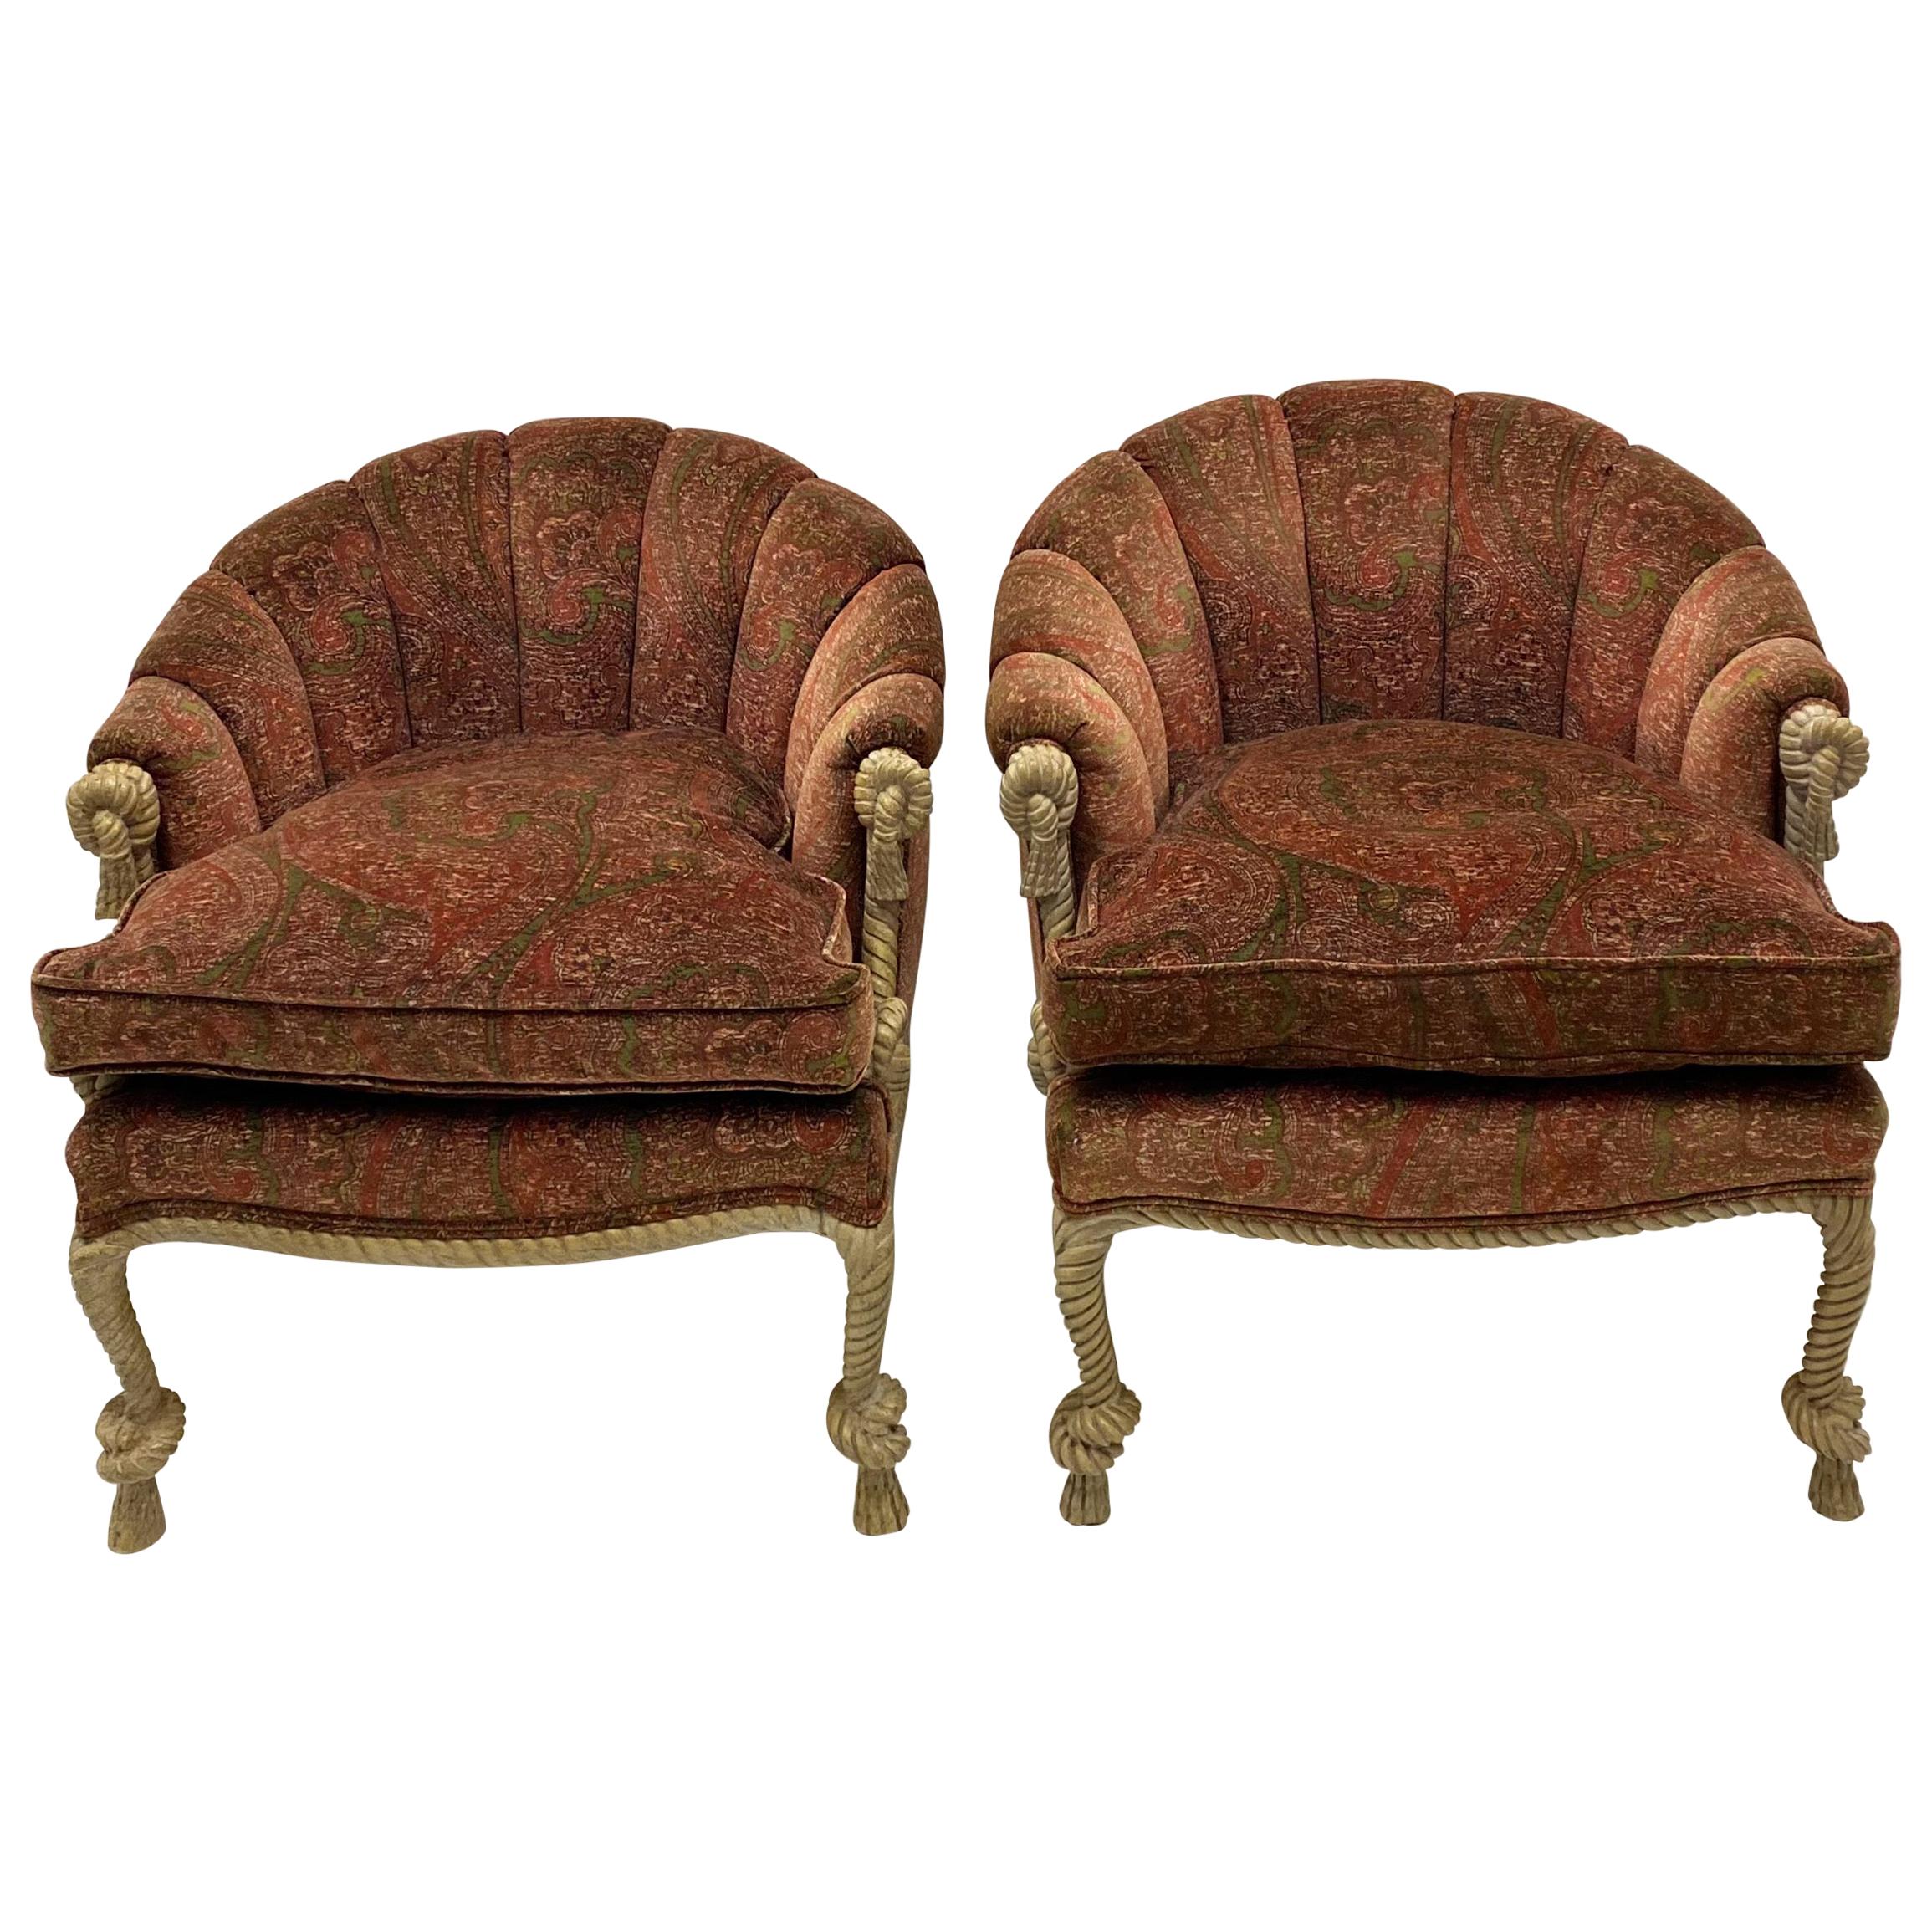 1960s Hollywood Regency Italian Carved Pine Tassel and Rope Tub Chairs, a Pair